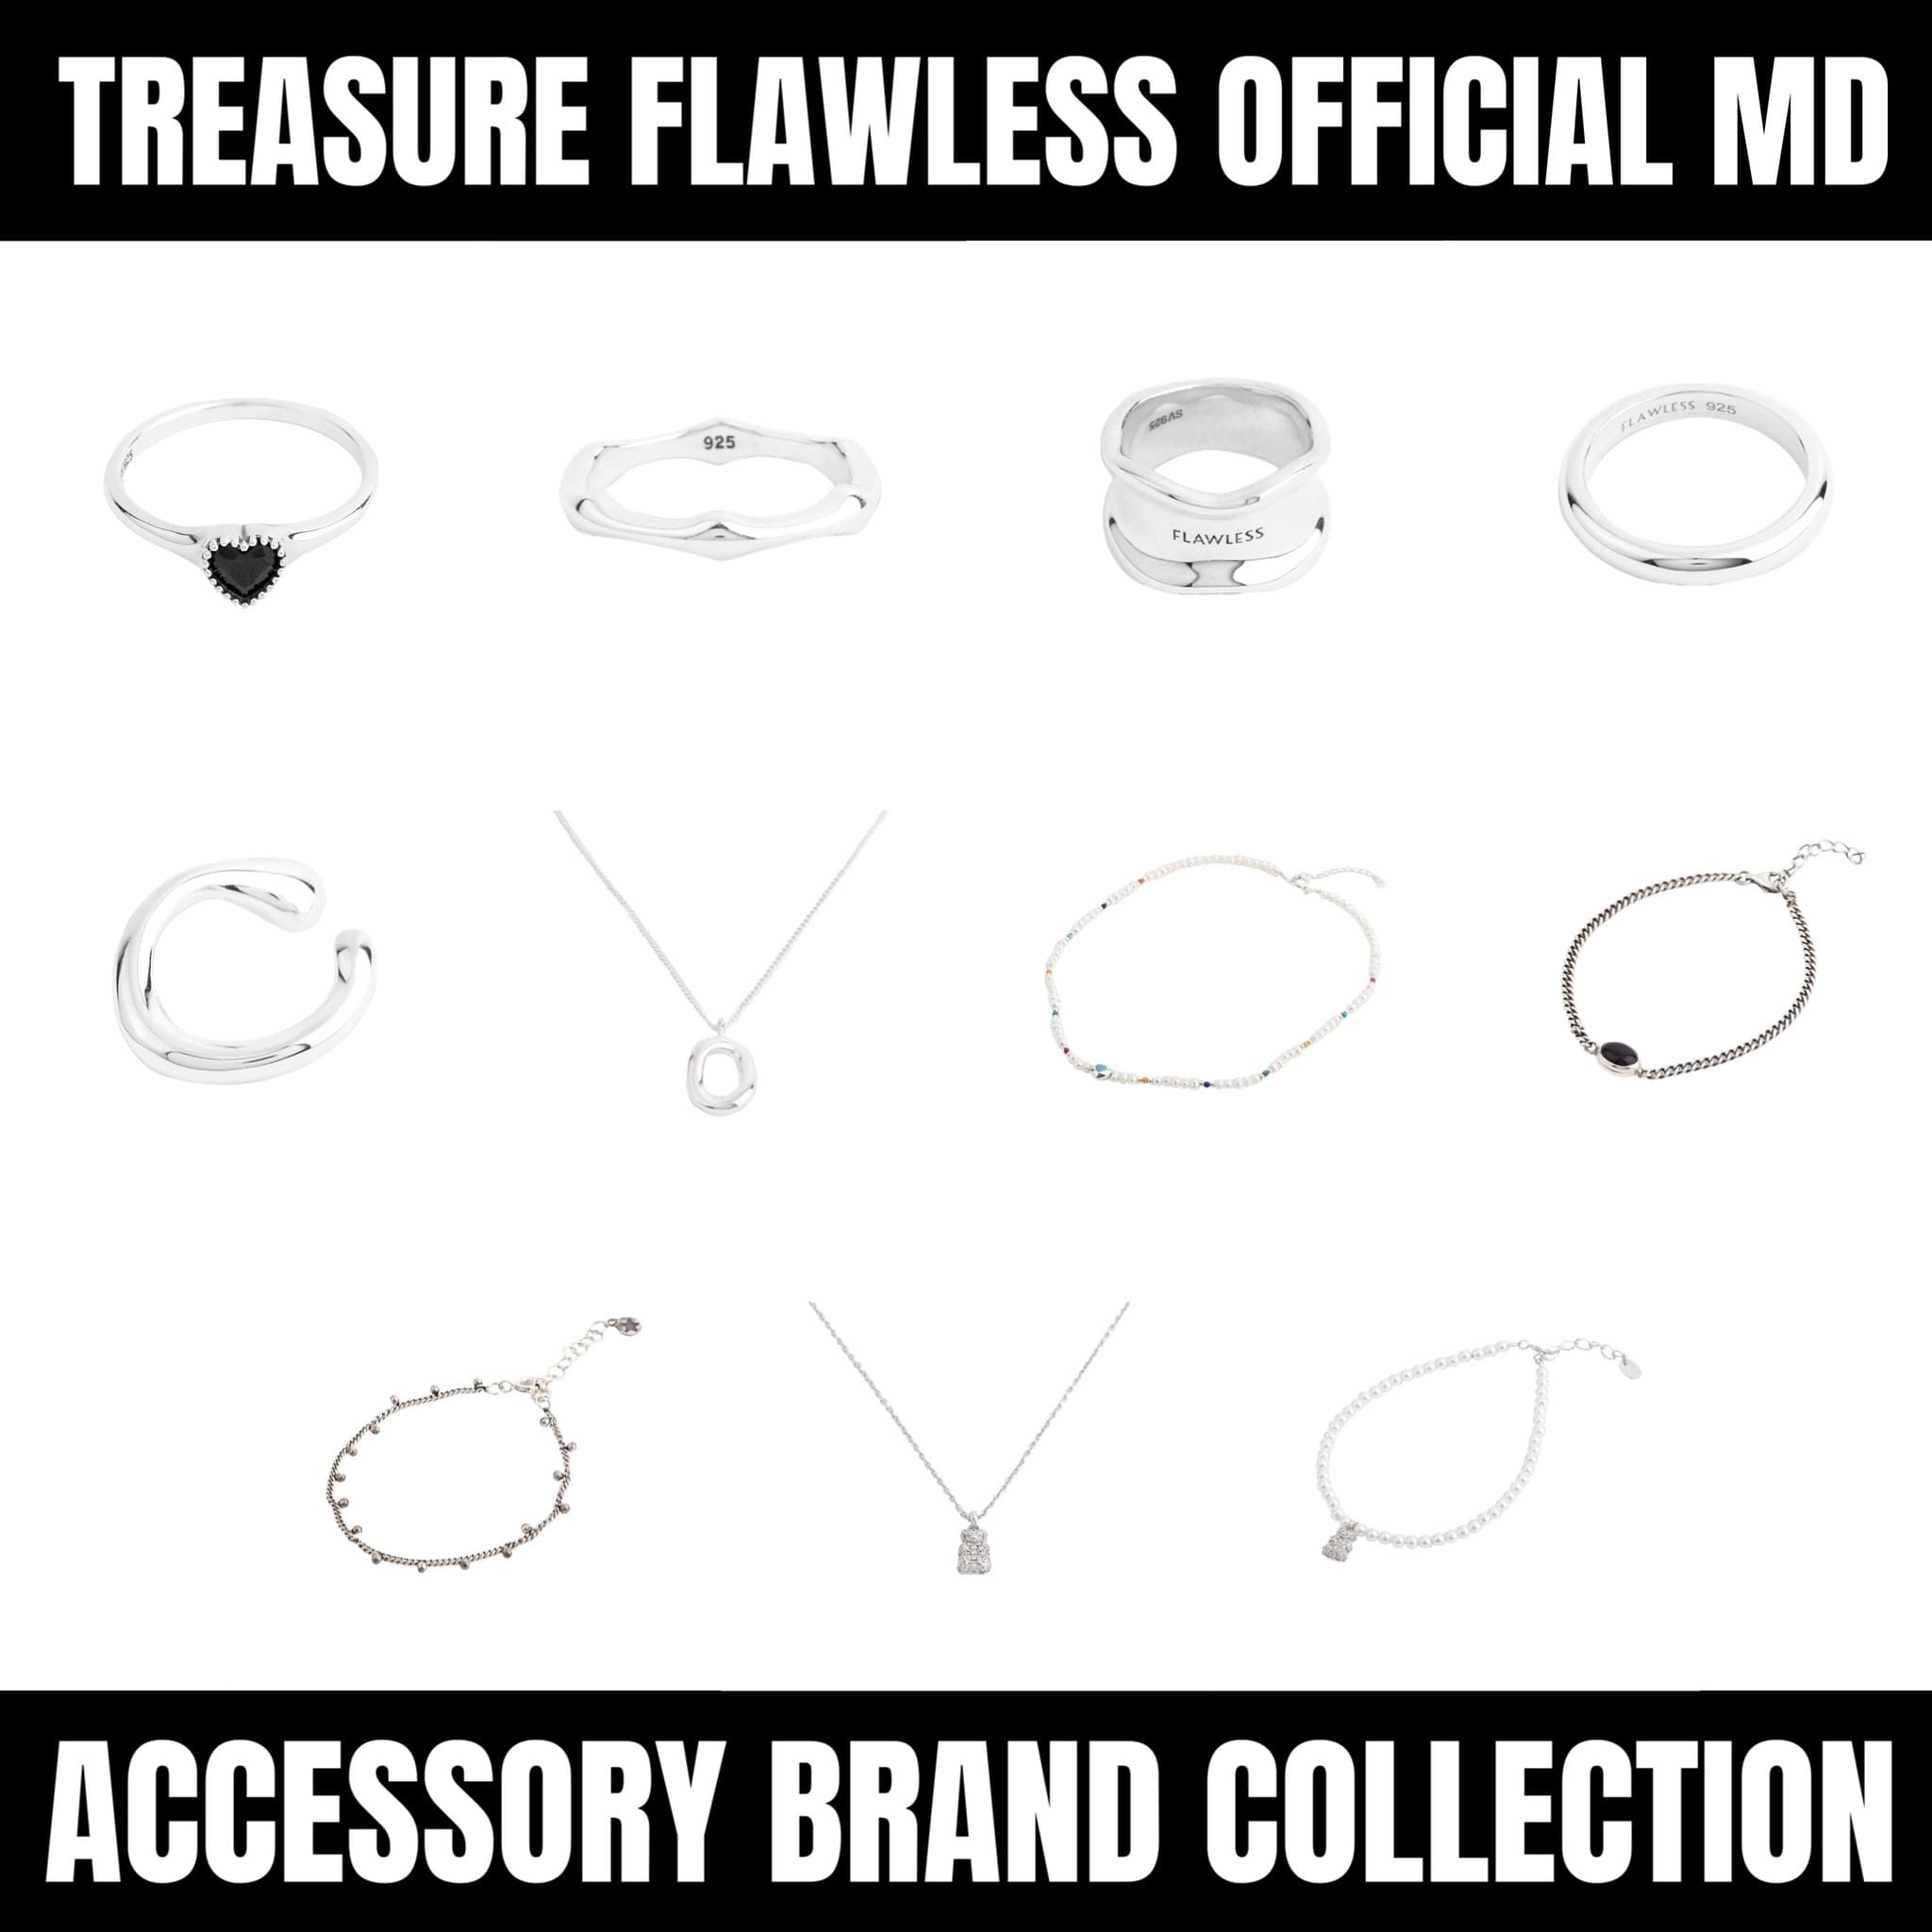 TREASURE FLAWLESS ACCESSORY OFFICIAL MD – Bora Clover